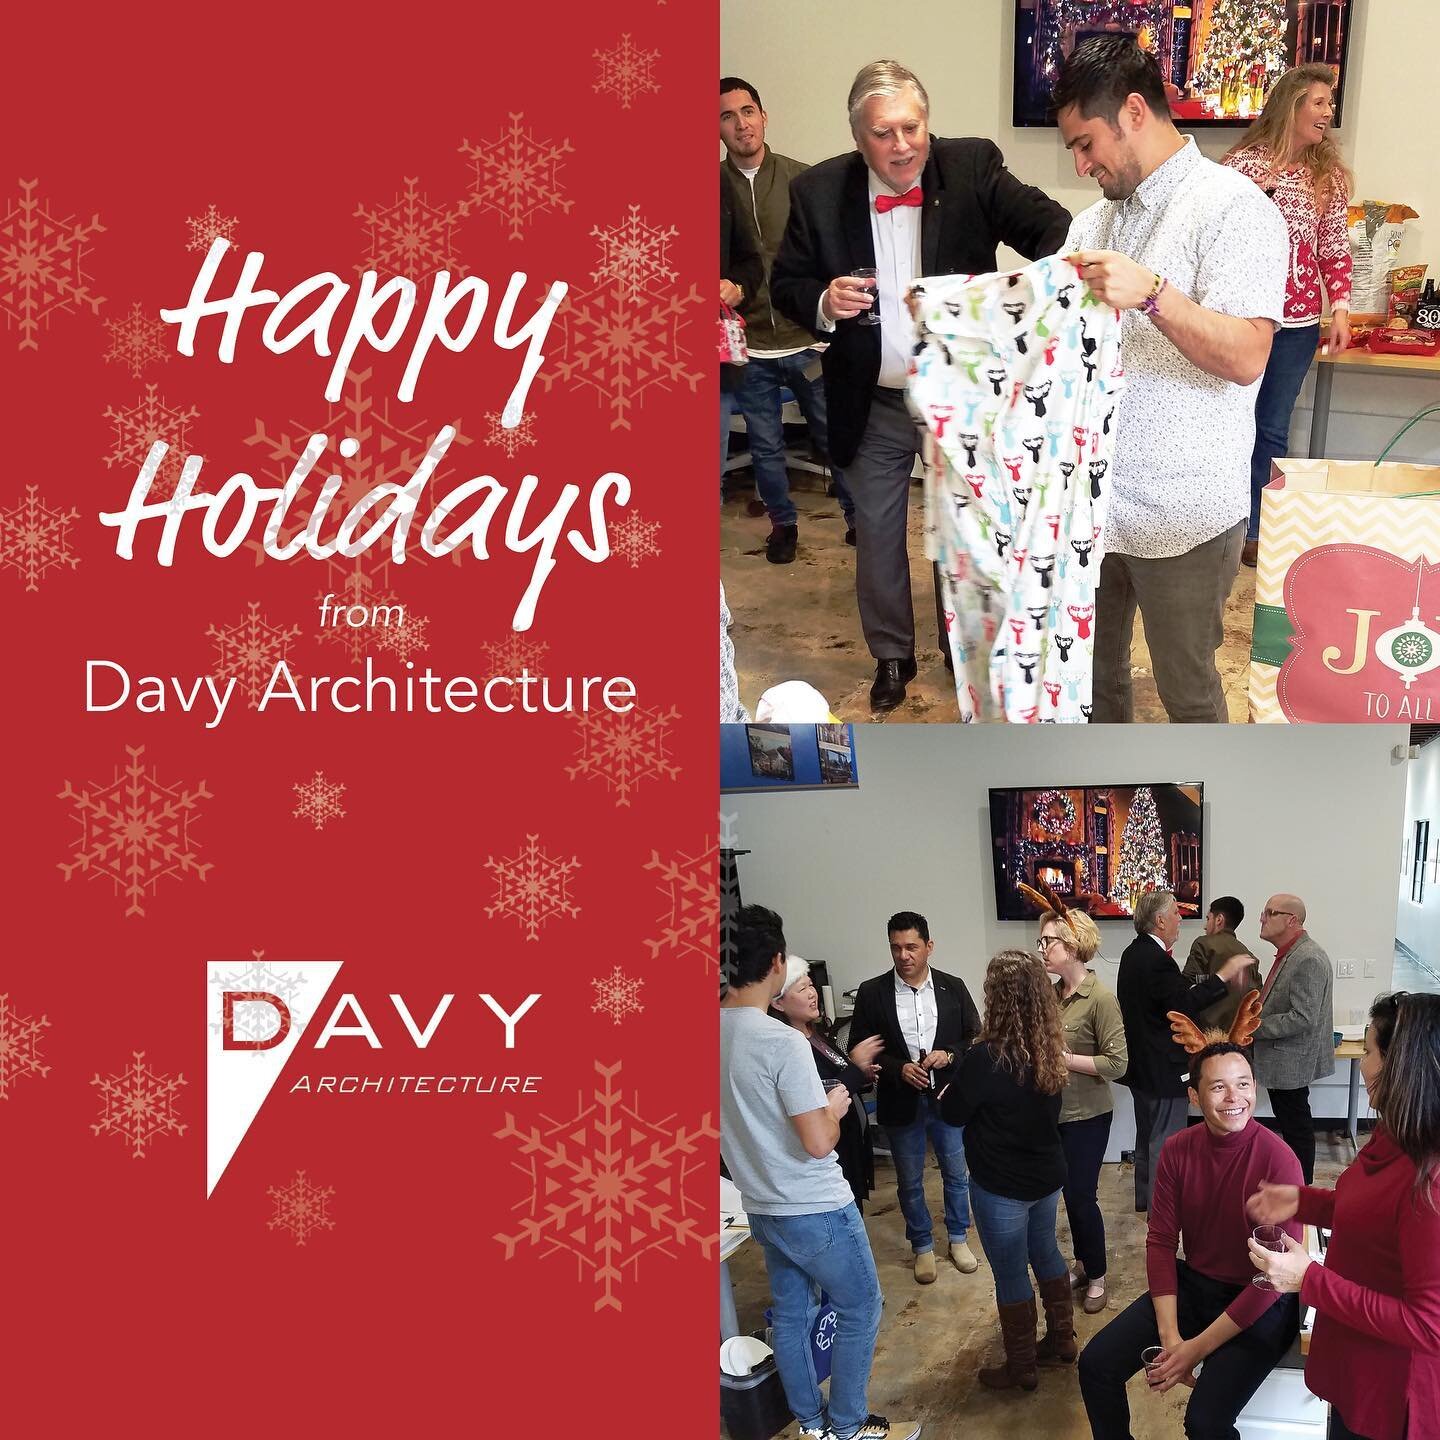 ❄️ Happy Holidays ❄️ from #teamdavy! 
Last week we got together to celebrate the season and all our successes in 2019. It was a wonderful event full of good cheer, delicious food and our annual white elephant 🐘 gift exchange!

It&rsquo;s been an ama